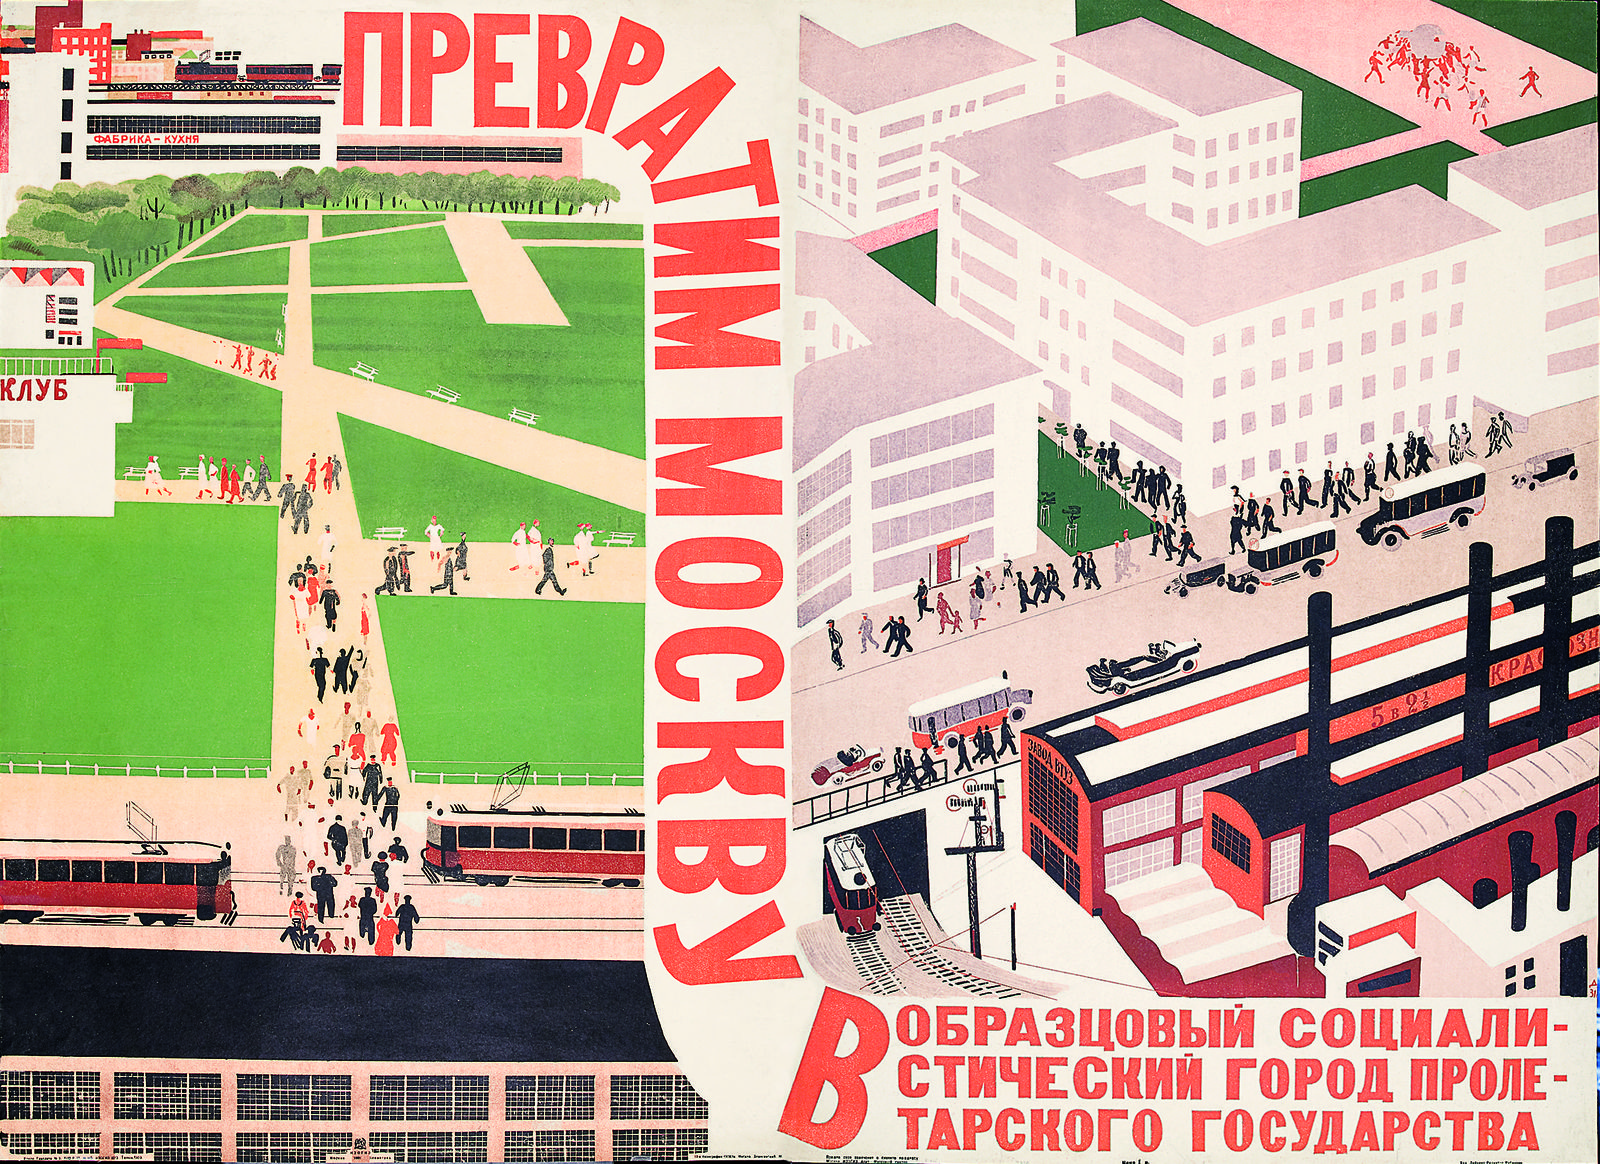 "Let's Transform Moscow into the Model Socialist City of the Proletarian State". Poster by Aleksandr Deineka, 1931 Print by Izogiz